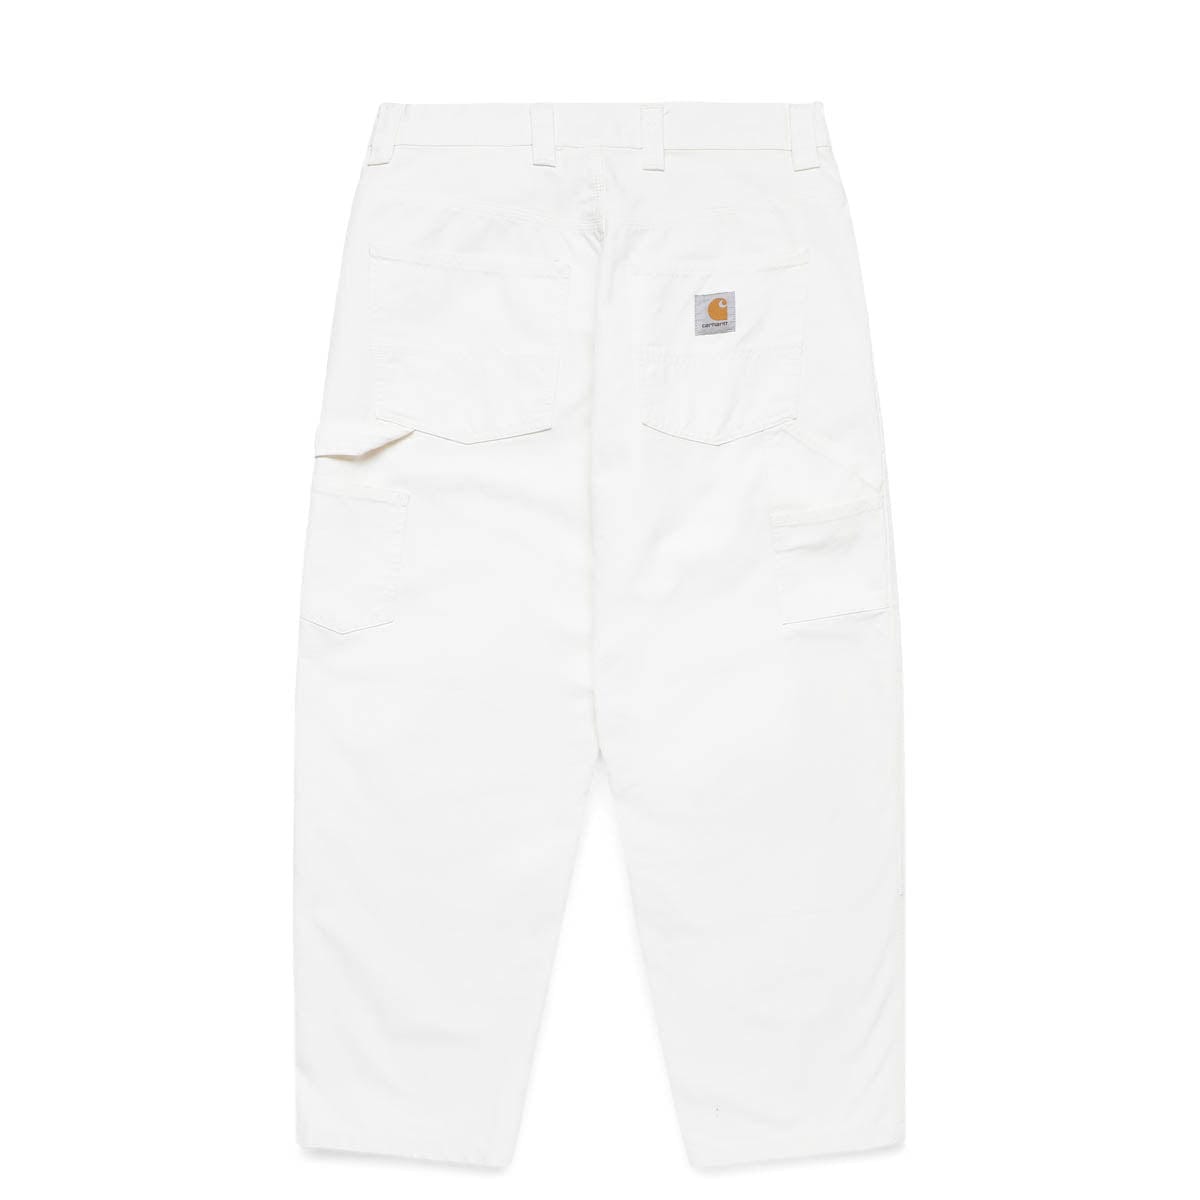 Carhartt WIP Bottoms WIDE PANEL PANT